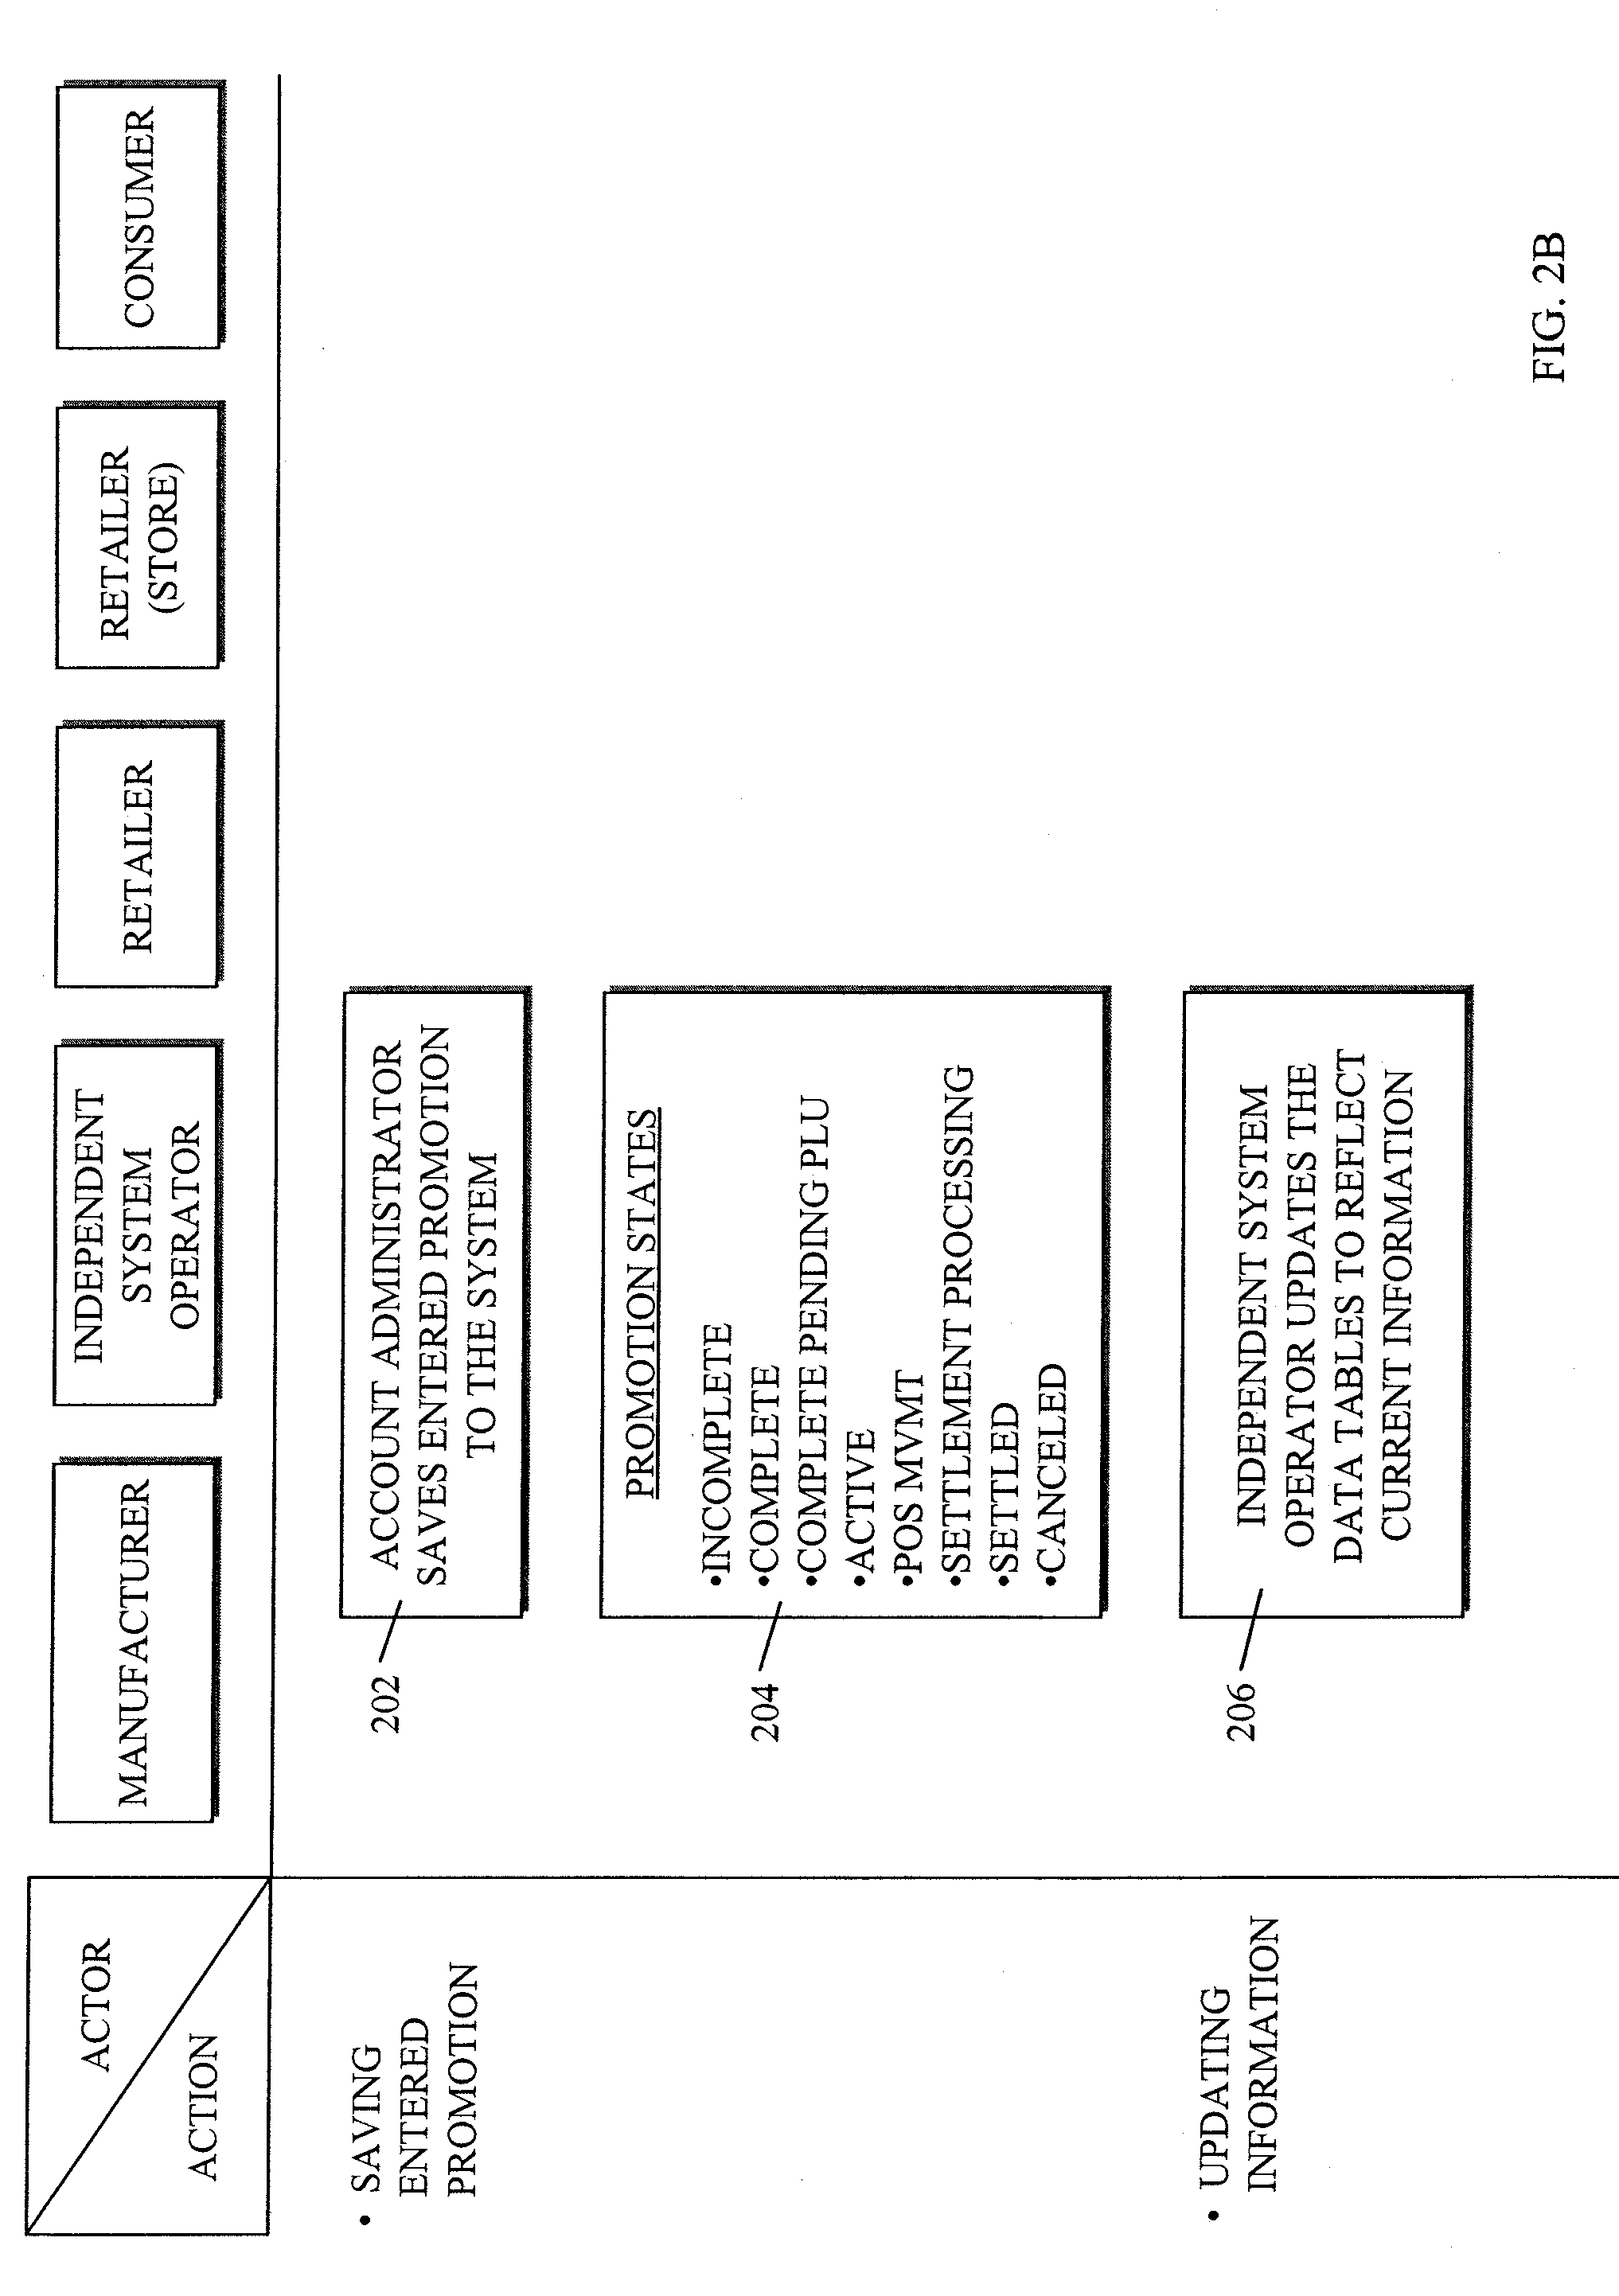 System and method for administering promotions